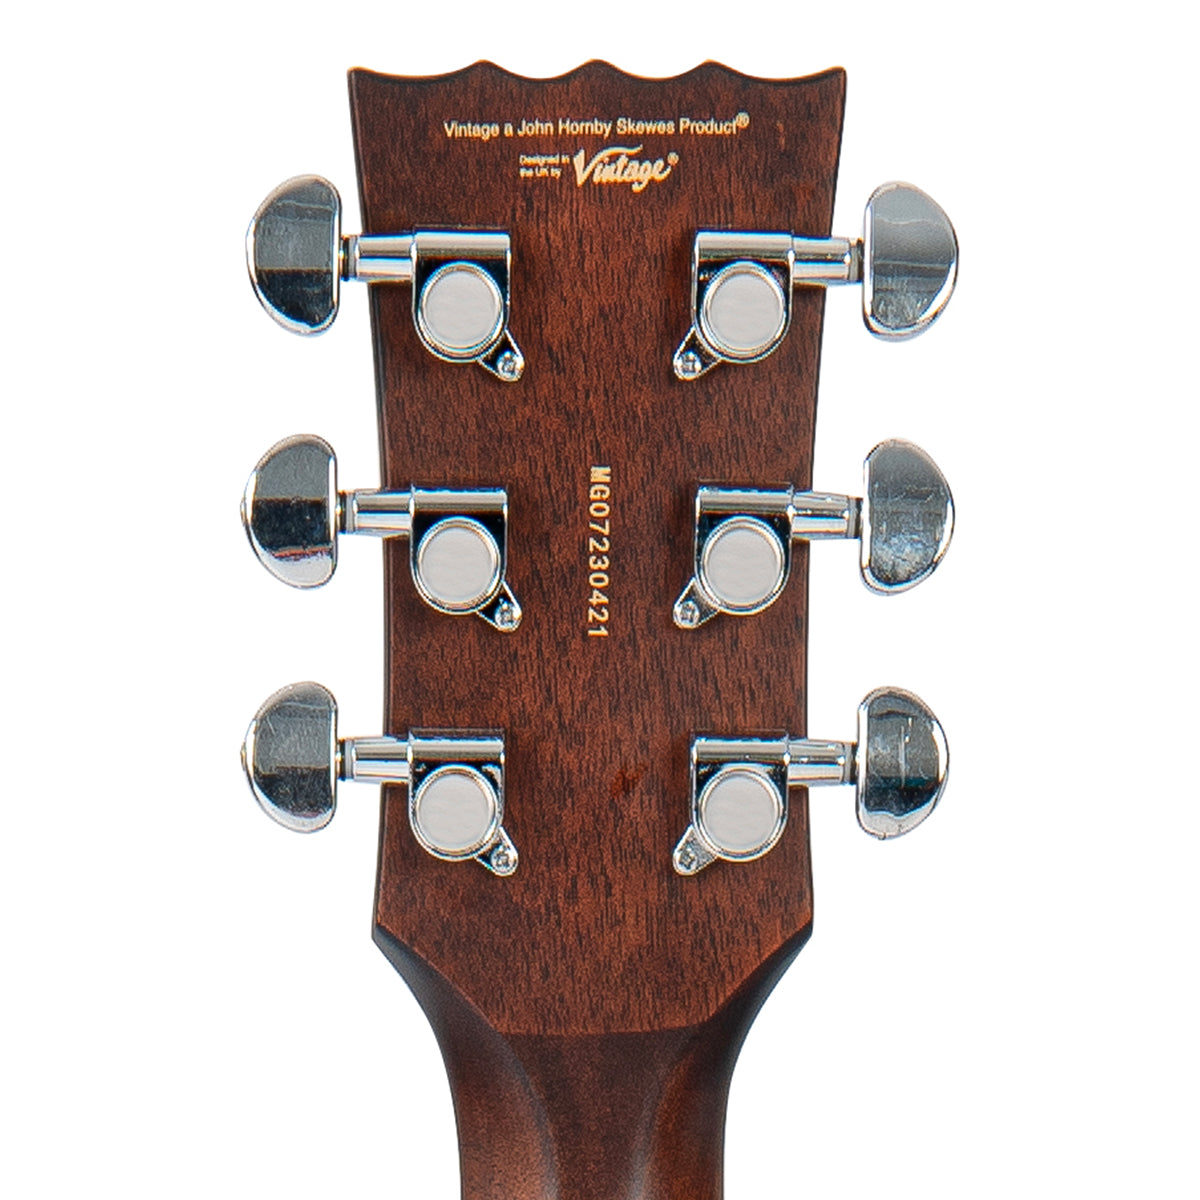 Vintage Stage Series 'Folk' Cutaway Electro-Acoustic Guitar ~ Natural, Electric Acoustic Guitars for sale at Richards Guitars.